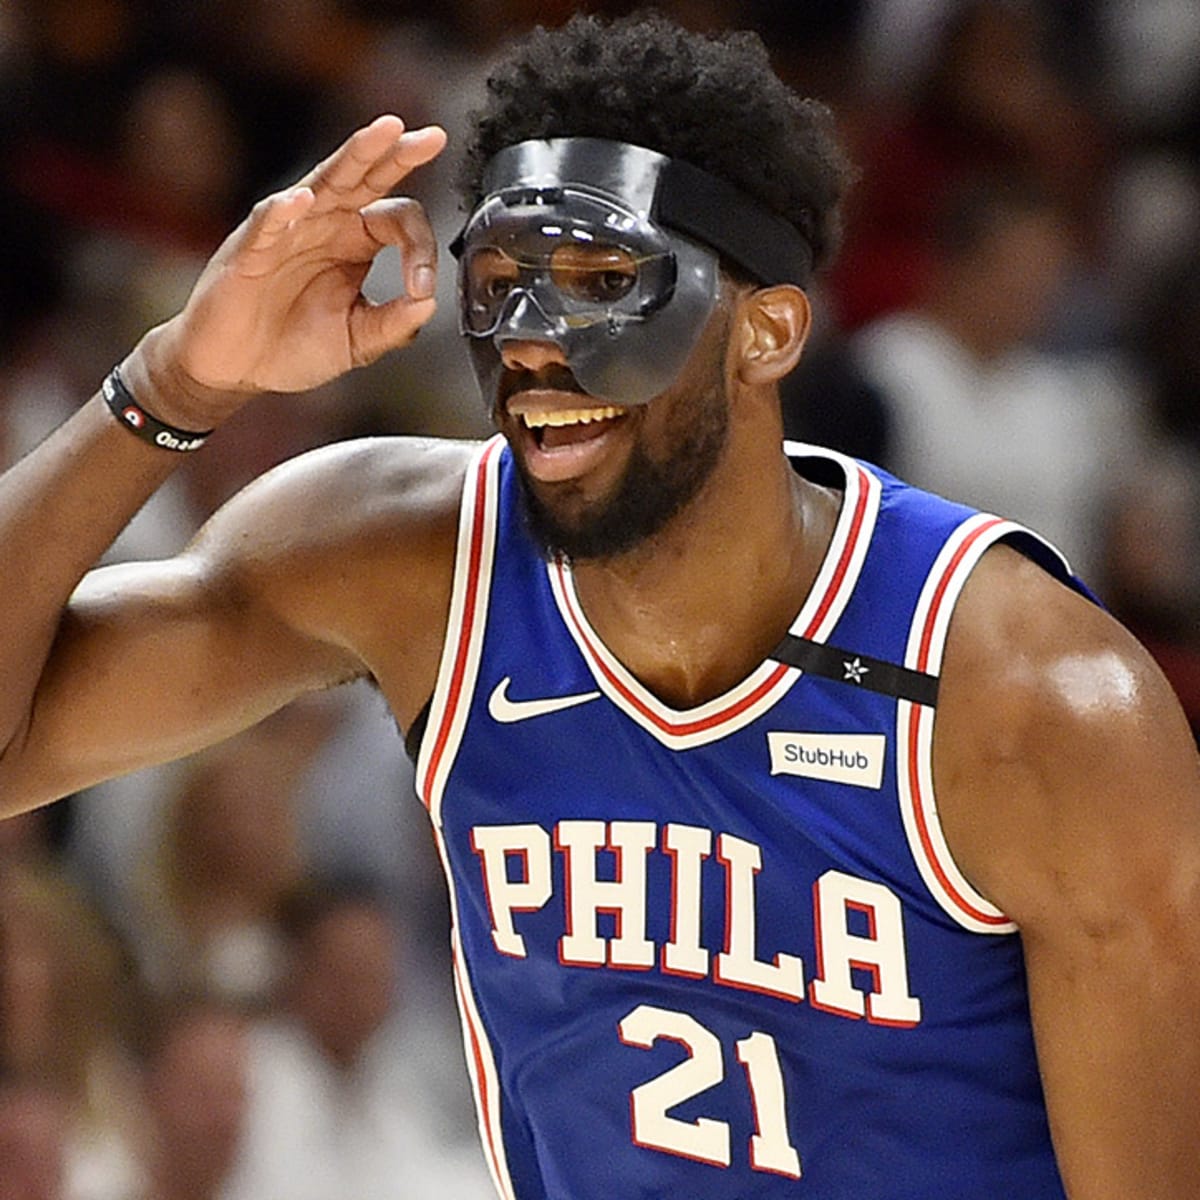 It's whatever': Joel Embiid brushes off wearing protective mask